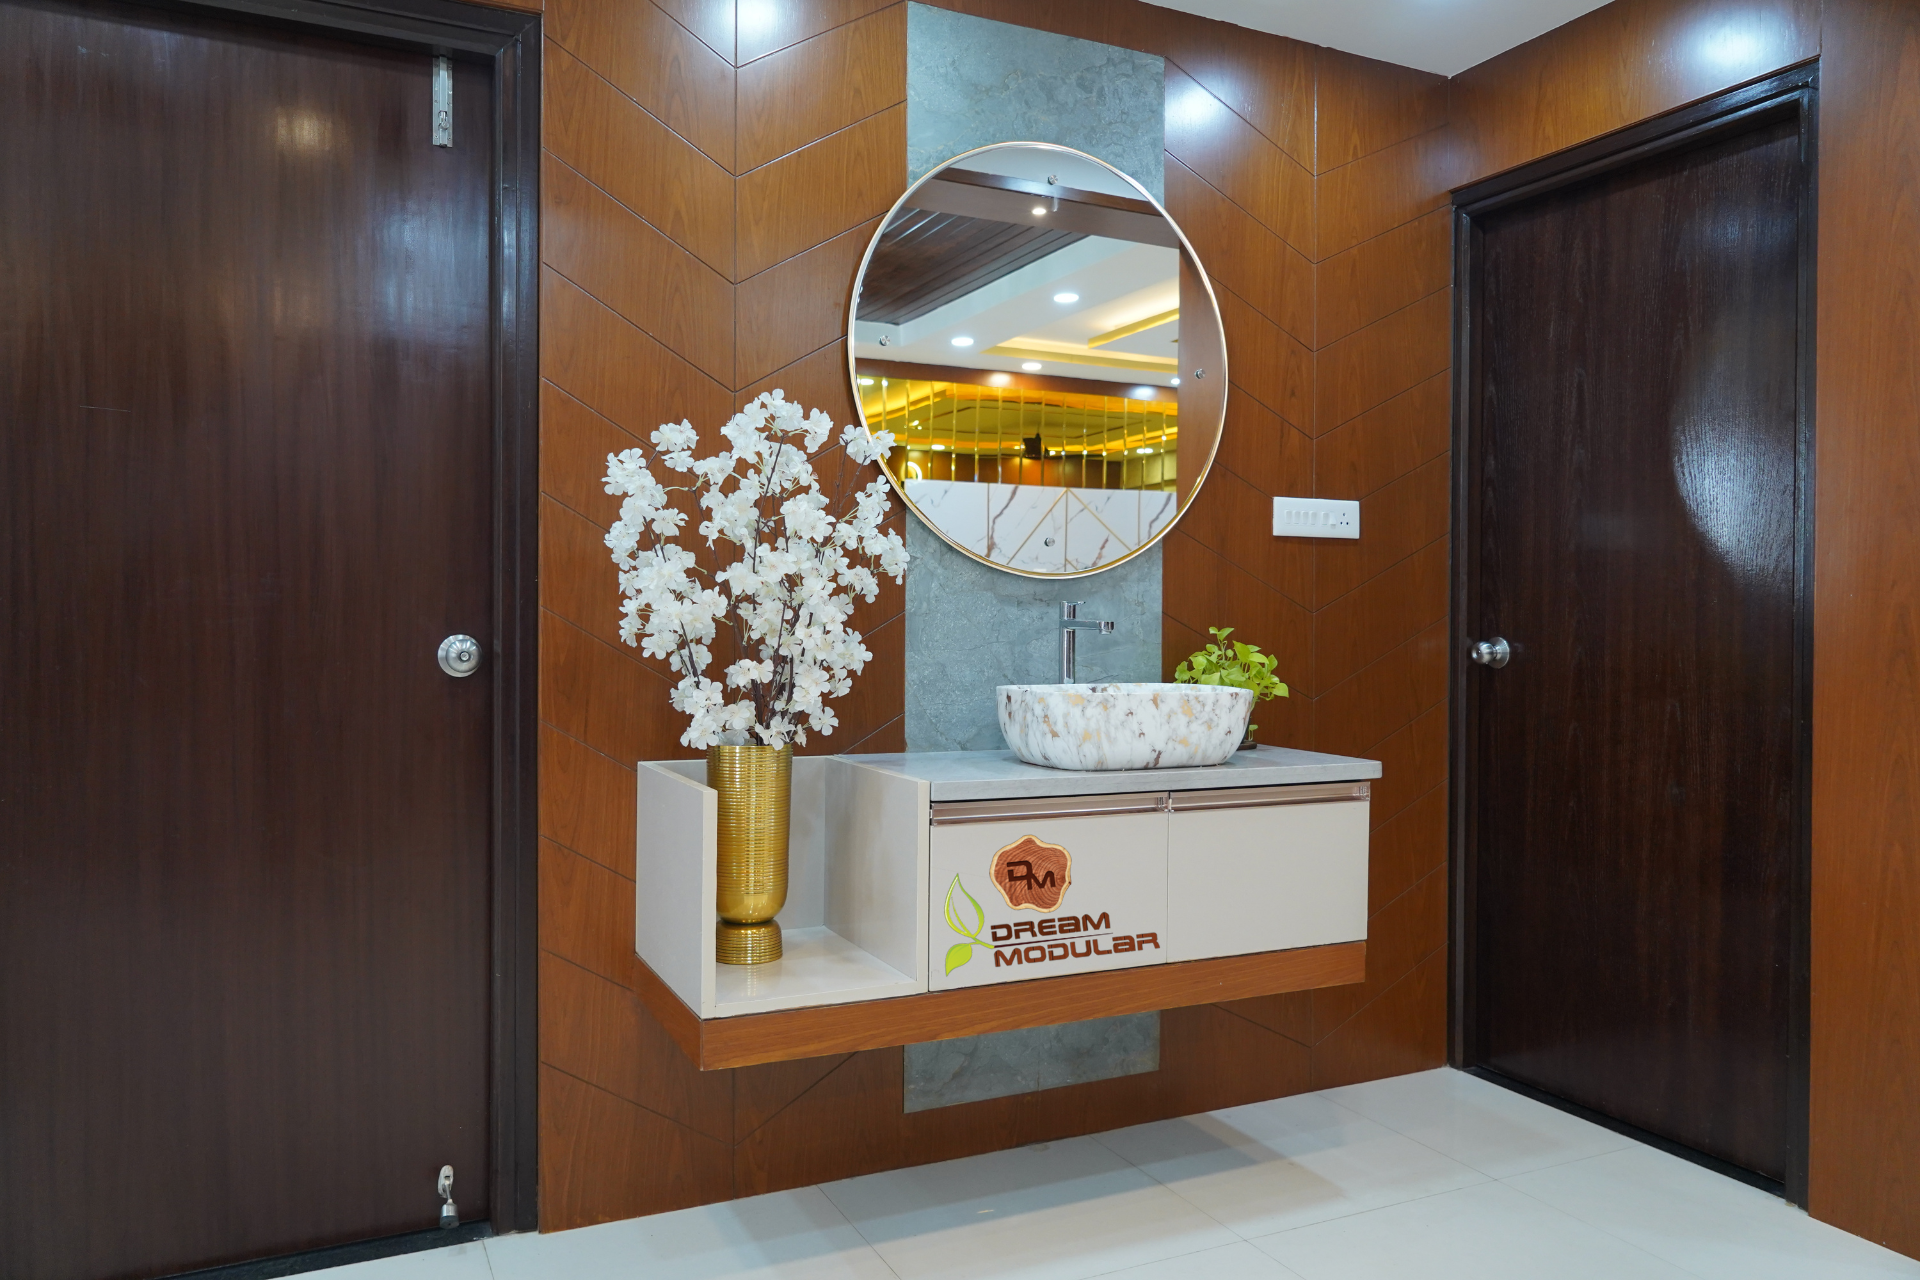 A vanity unit with wooden paneling and a mirror, designed by Dream Modular an interior design company in Hyderabad and backed by warranty.